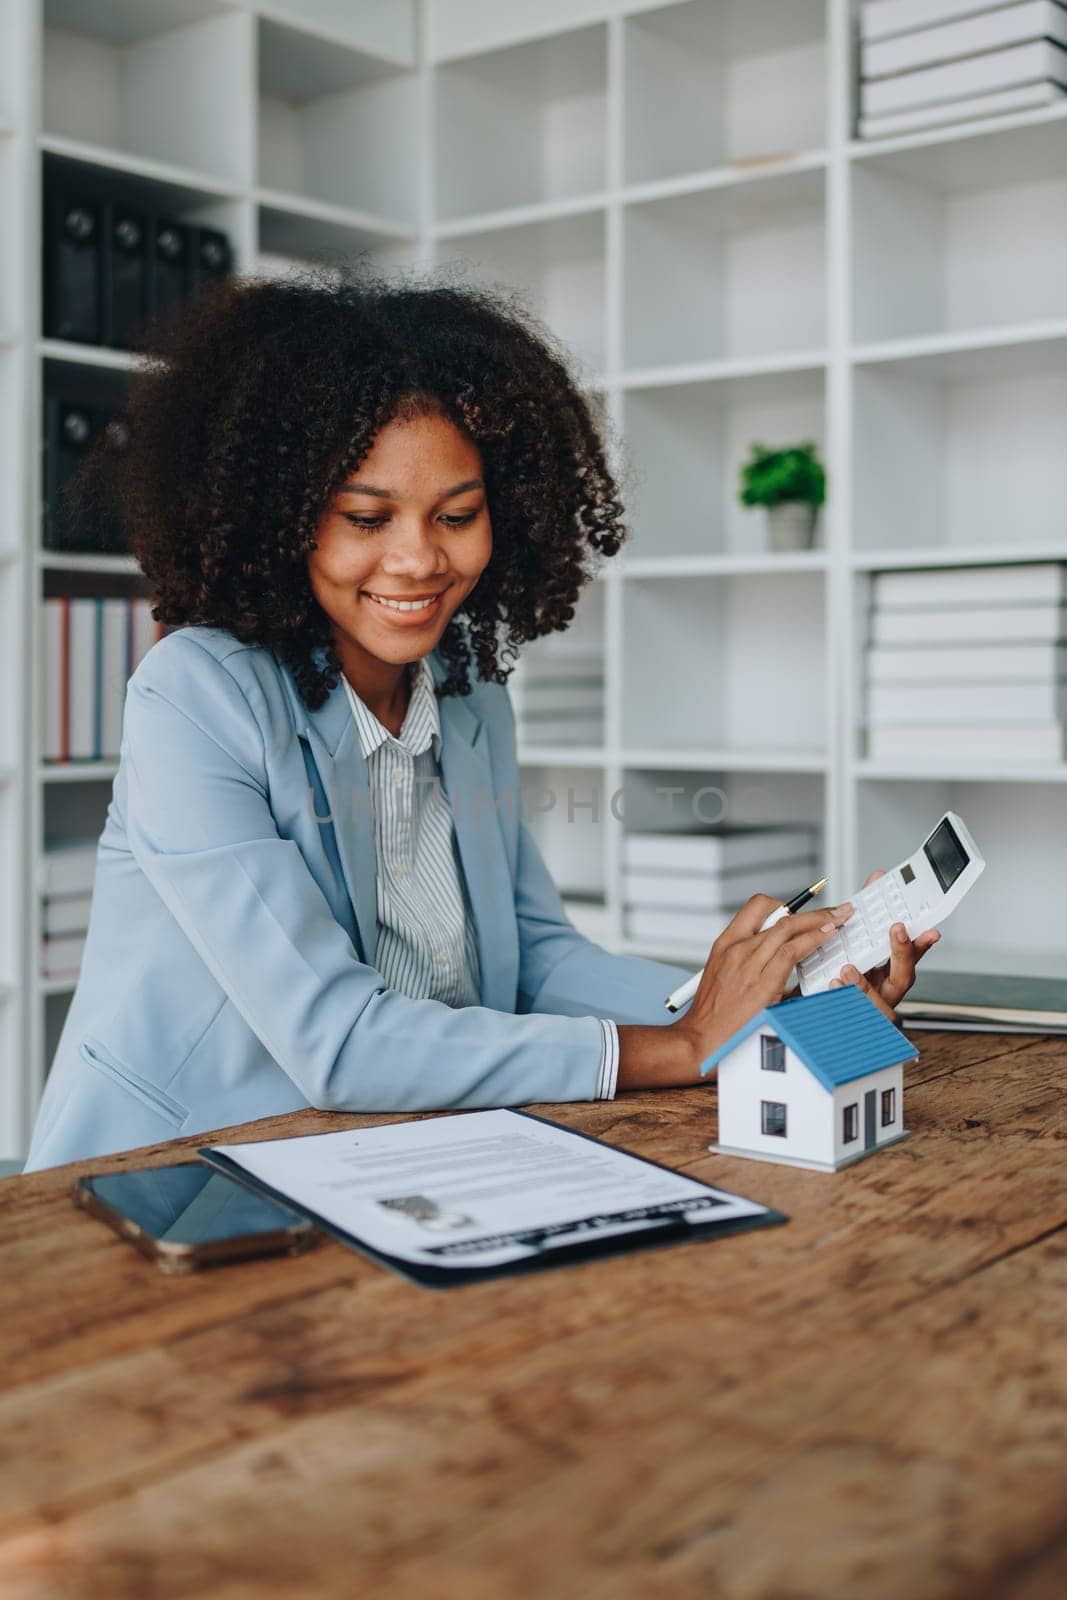 Real estate agent, African American businesswoman Africans use smartphone and calculators to offer mortgages to their clients. Home mortgage and insurance finance concepts. by Manastrong